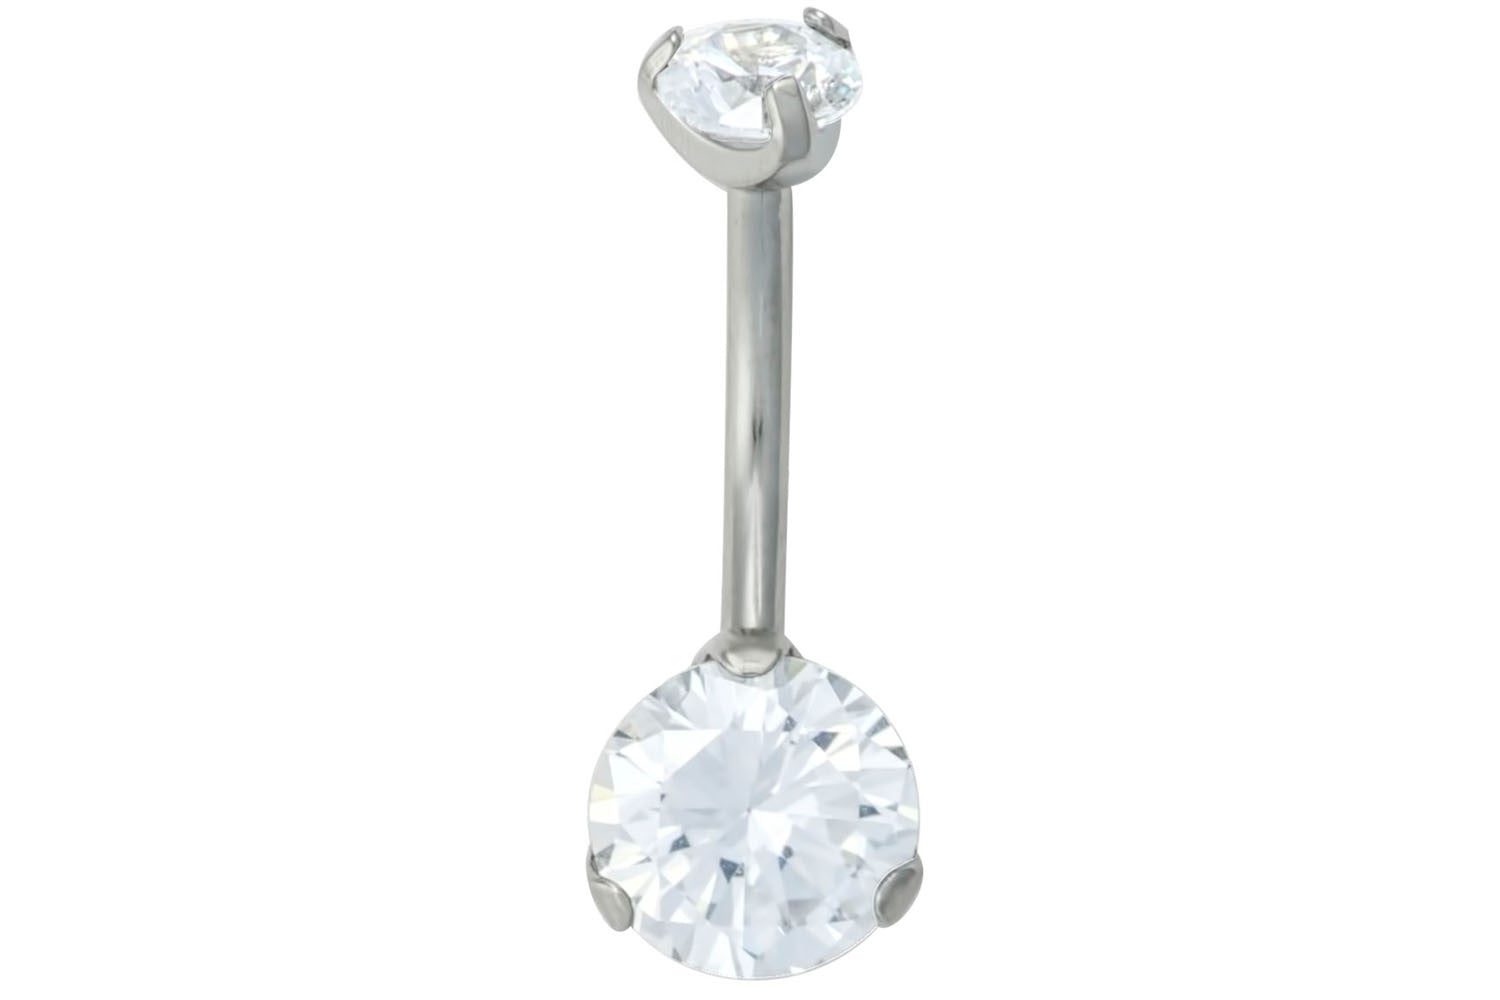 Our CZ belly ring features a large 8 mm solitaire Cubic Zirconia crystal for the ultimate eye catching belly piercing bling. This body jewelry is internally threaded for maximum comfort and made with surgical grade 316l stainless steel.